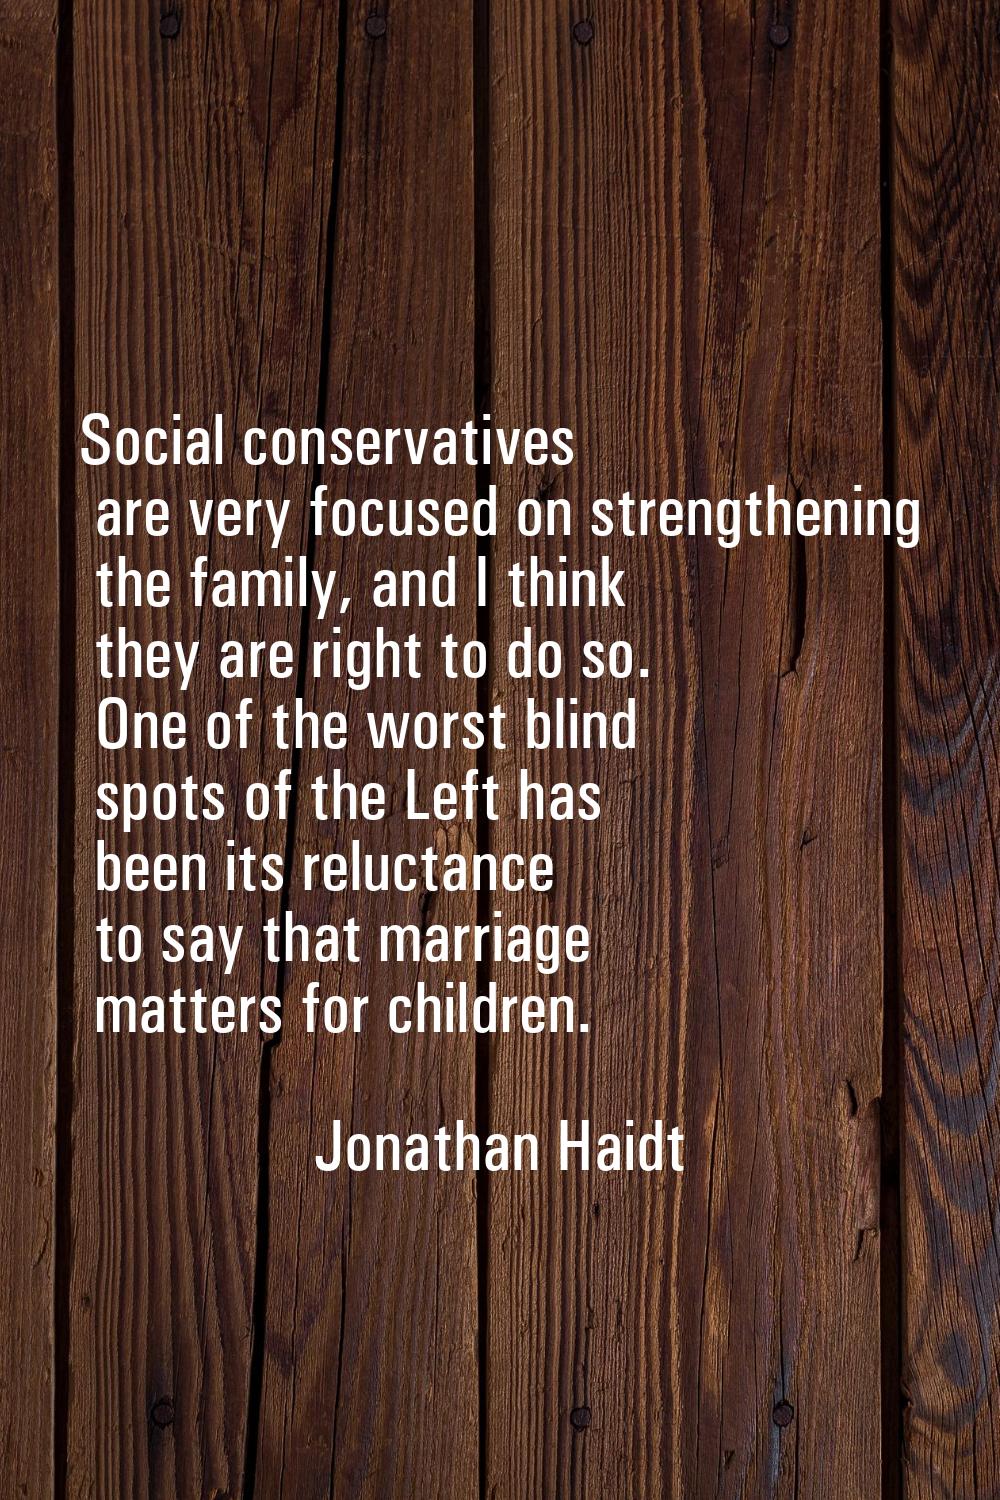 Social conservatives are very focused on strengthening the family, and I think they are right to do